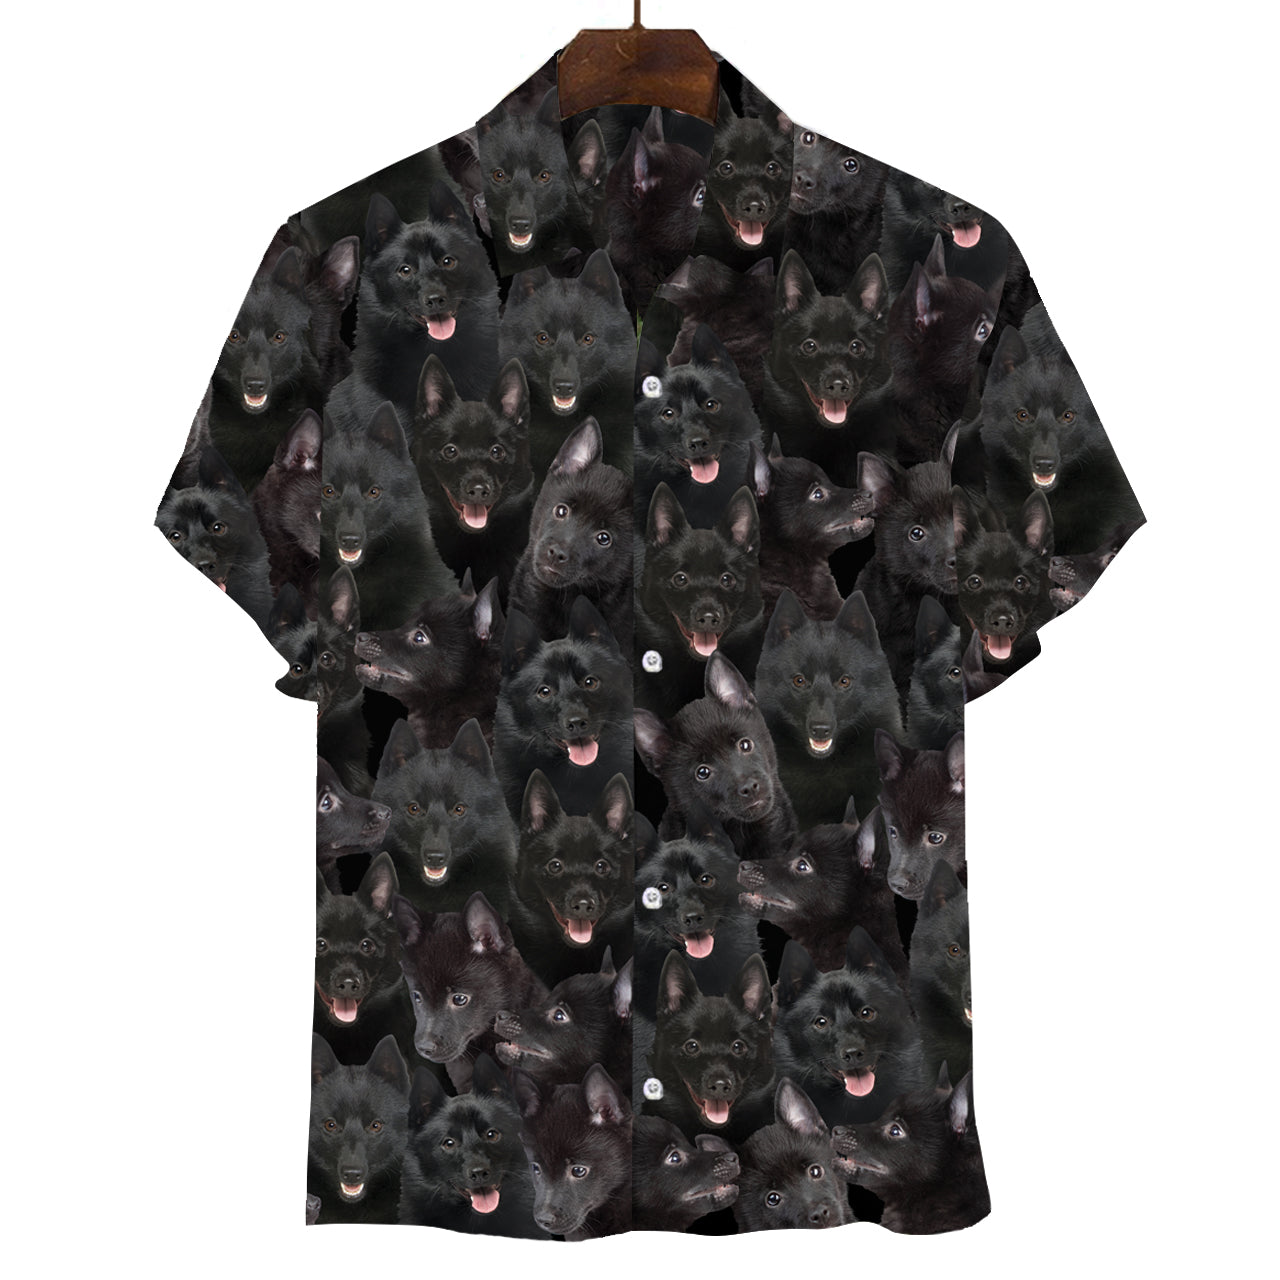 You Will Have A Bunch Of Schipperkes - Shirt V1